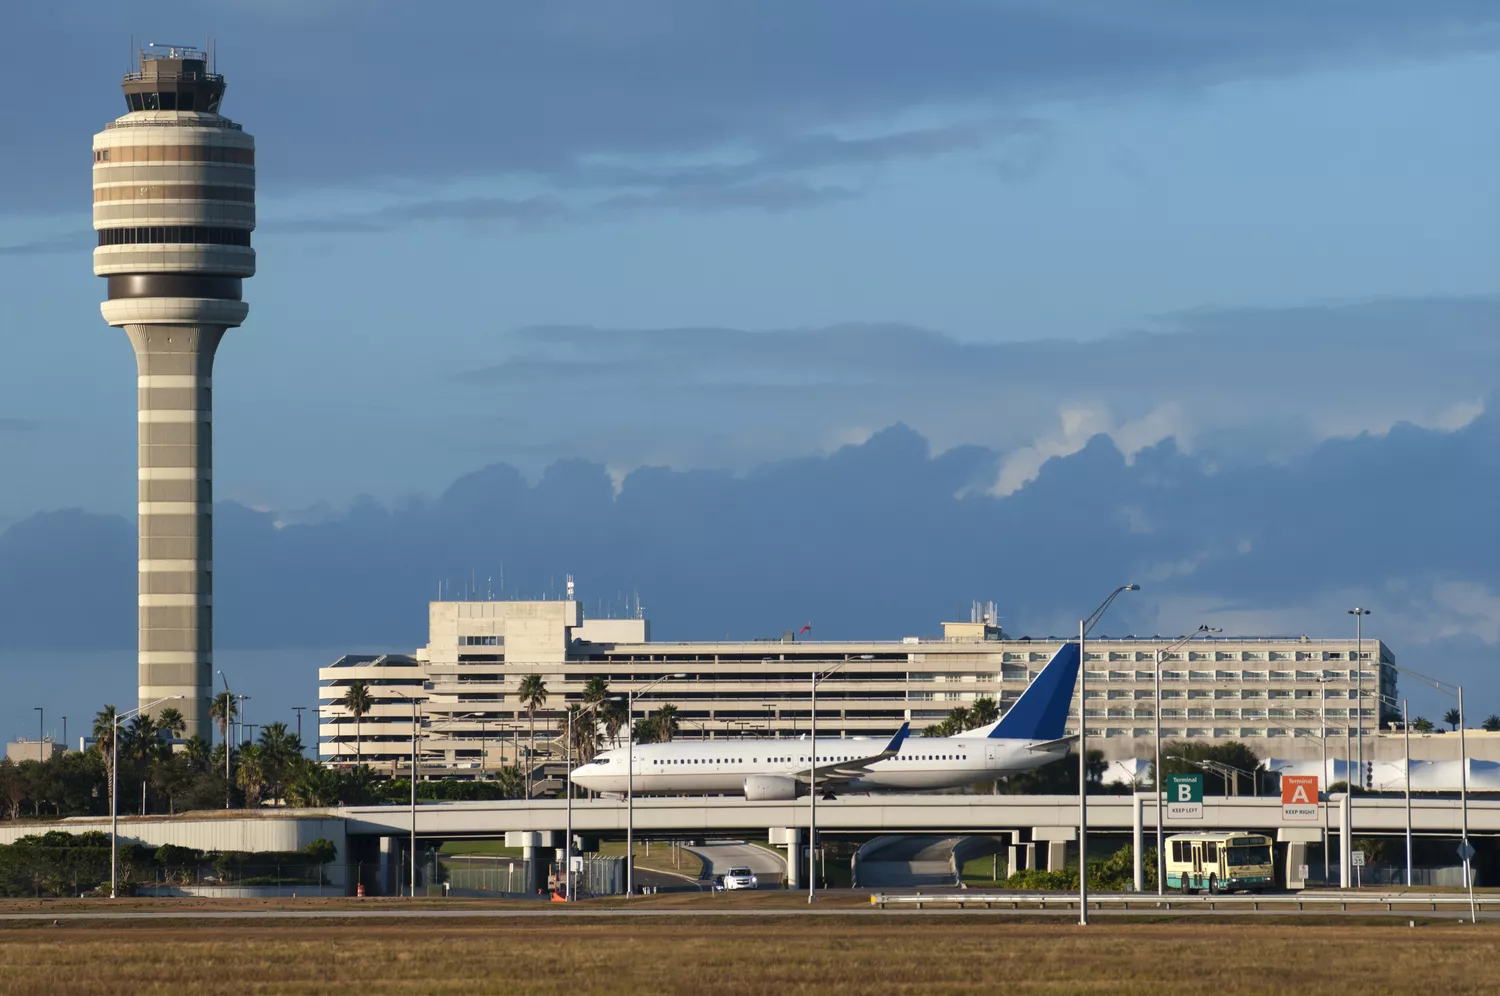 The worst U.S. airport is at Disney World.